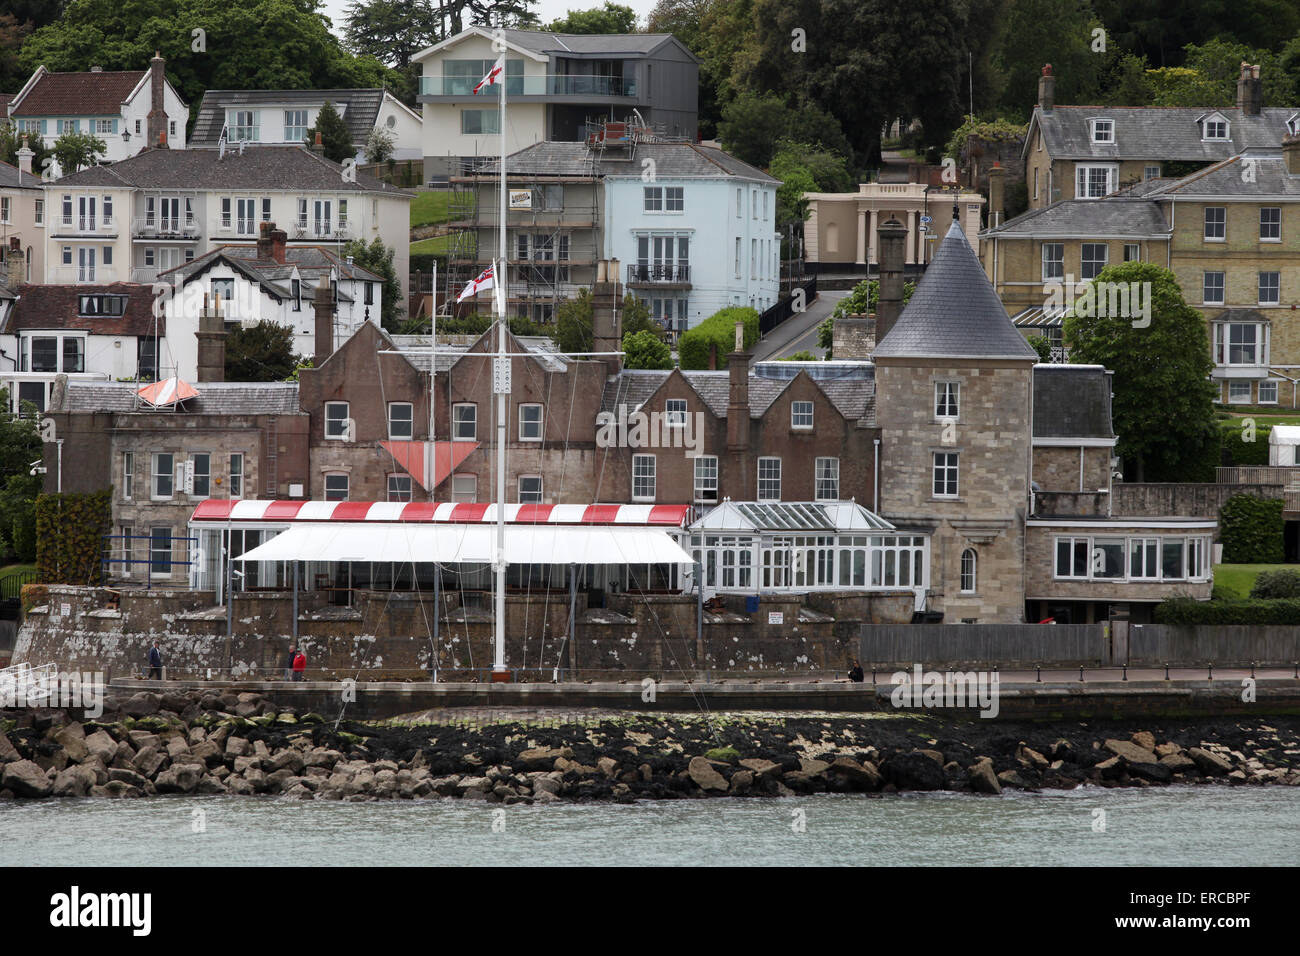 Cowes Royal Yacht Squadron yacht club in base a Cowes castello sull'Isola di Wight. Foto Stock